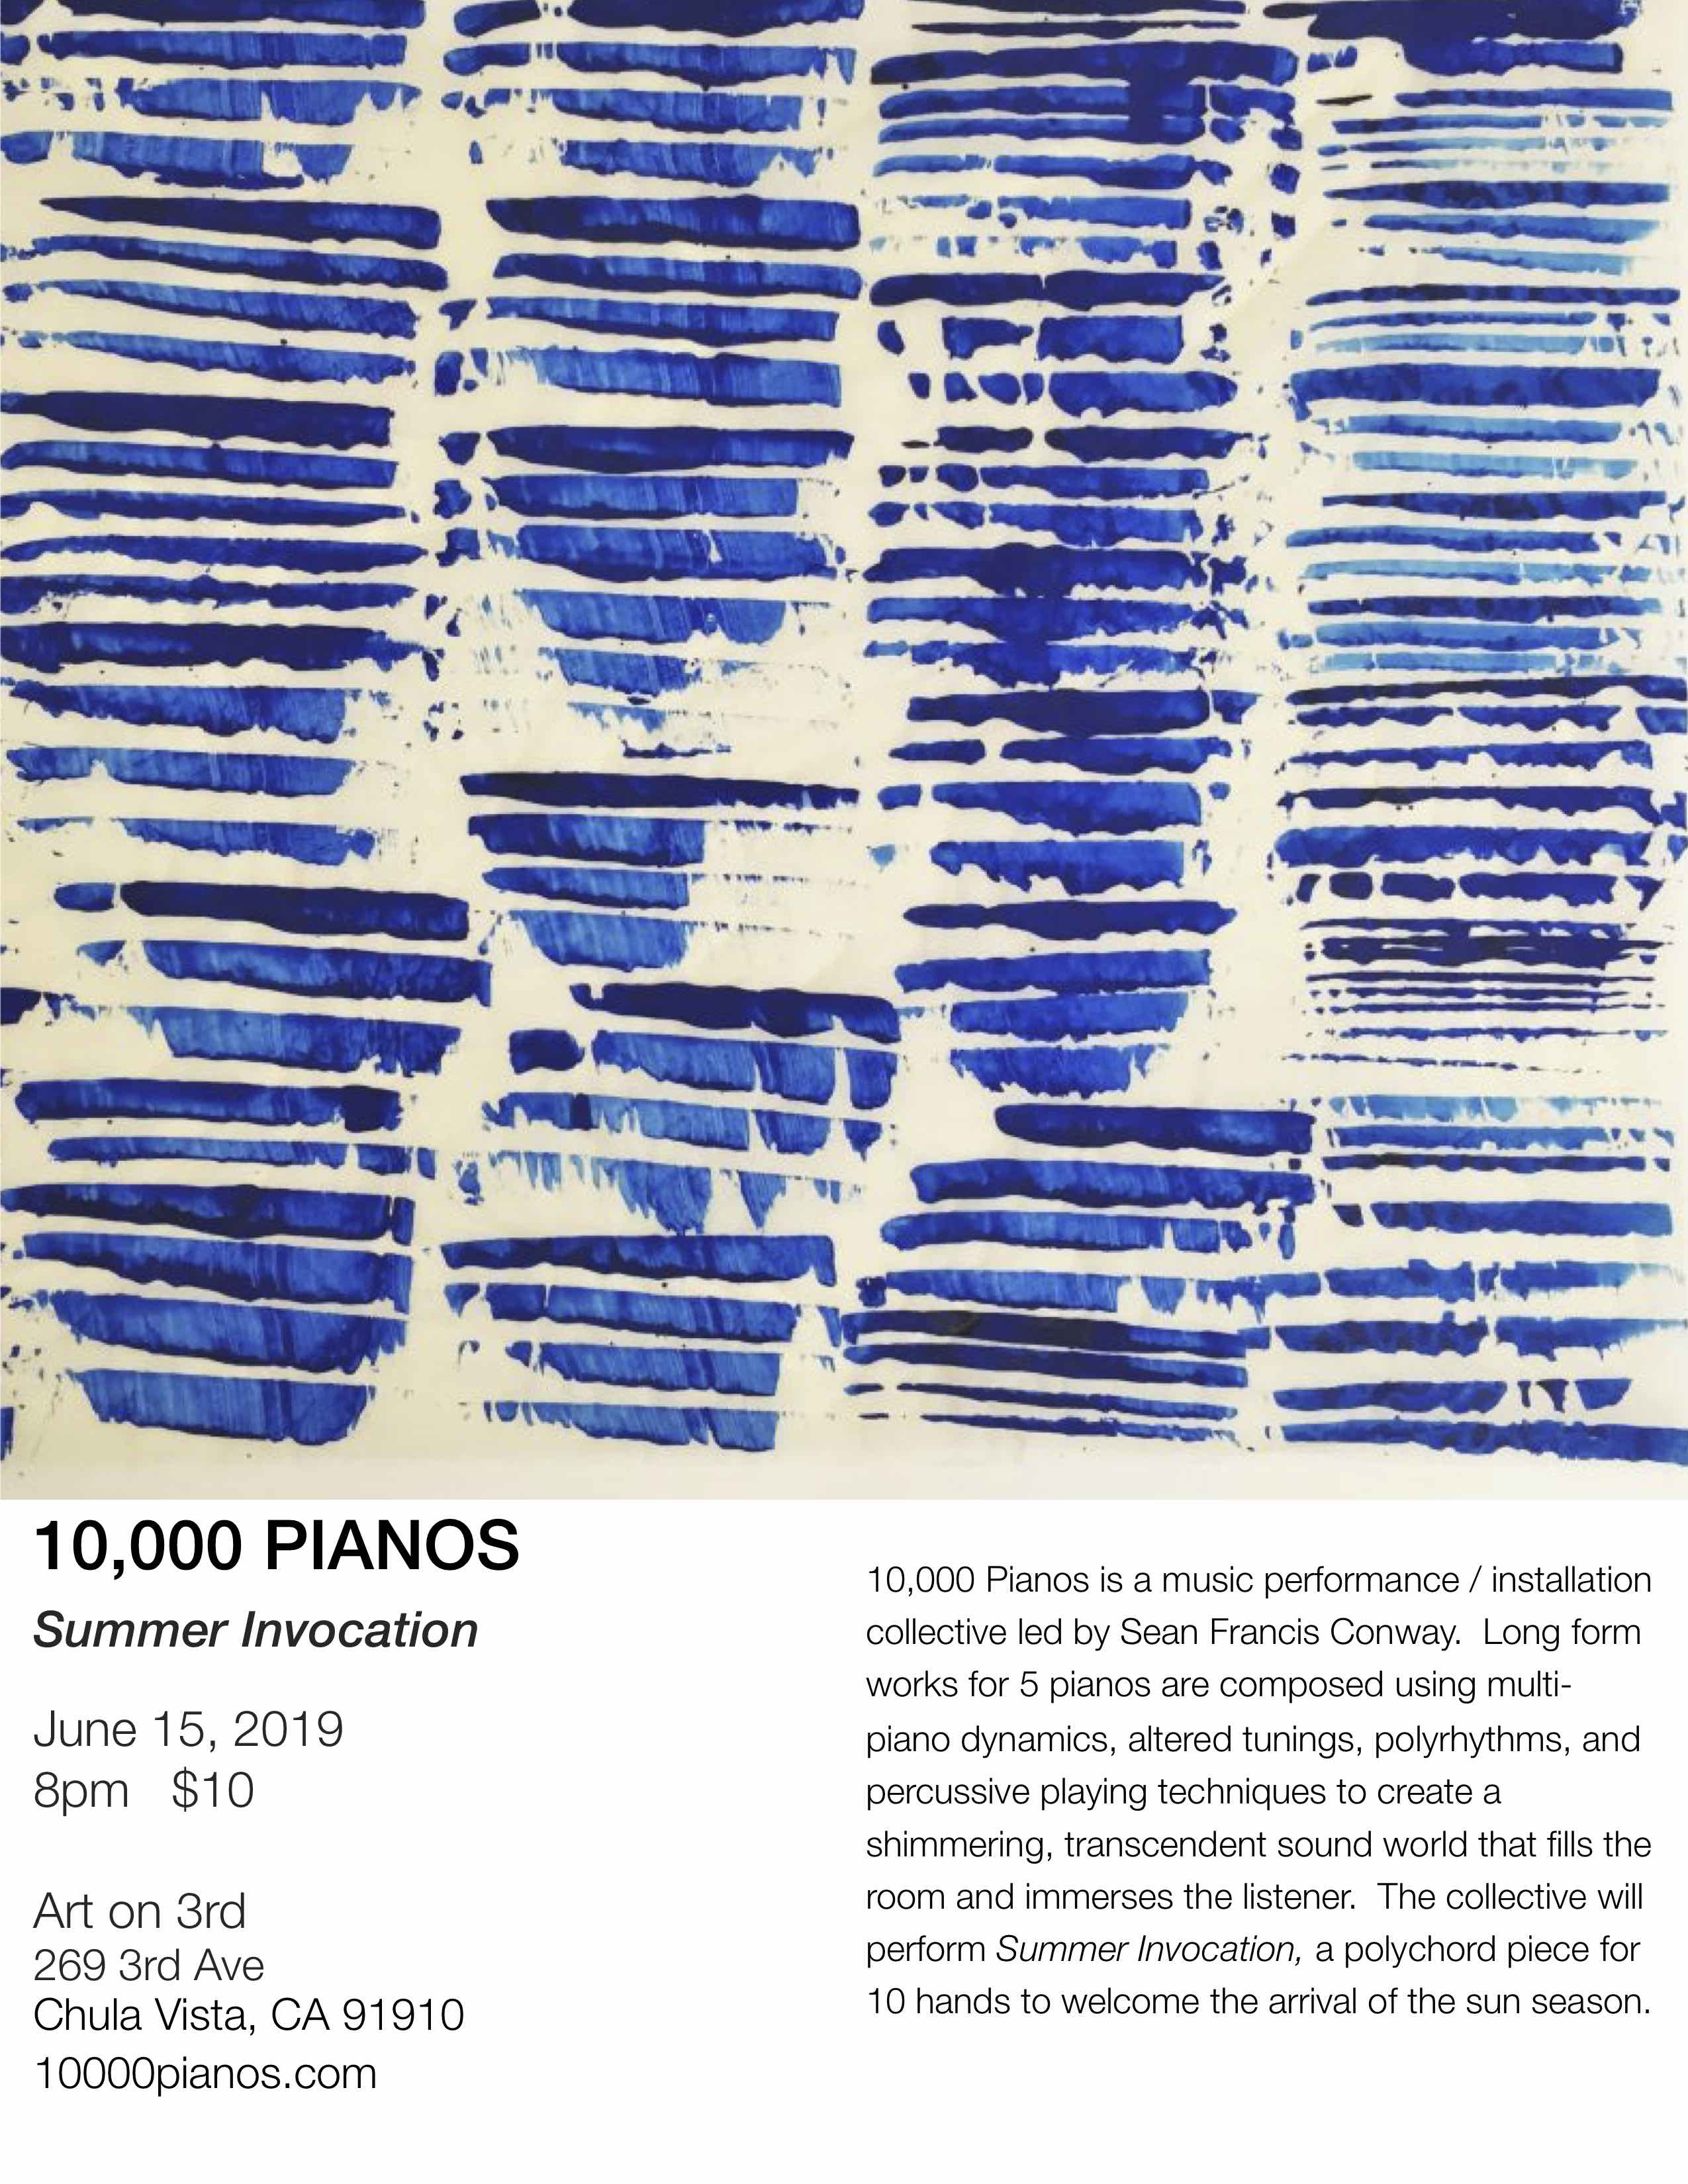 10000 Pianos June 15th 8pm $10 @ Art On 3rd 269 3rd Ave Chula Vista CA 91910